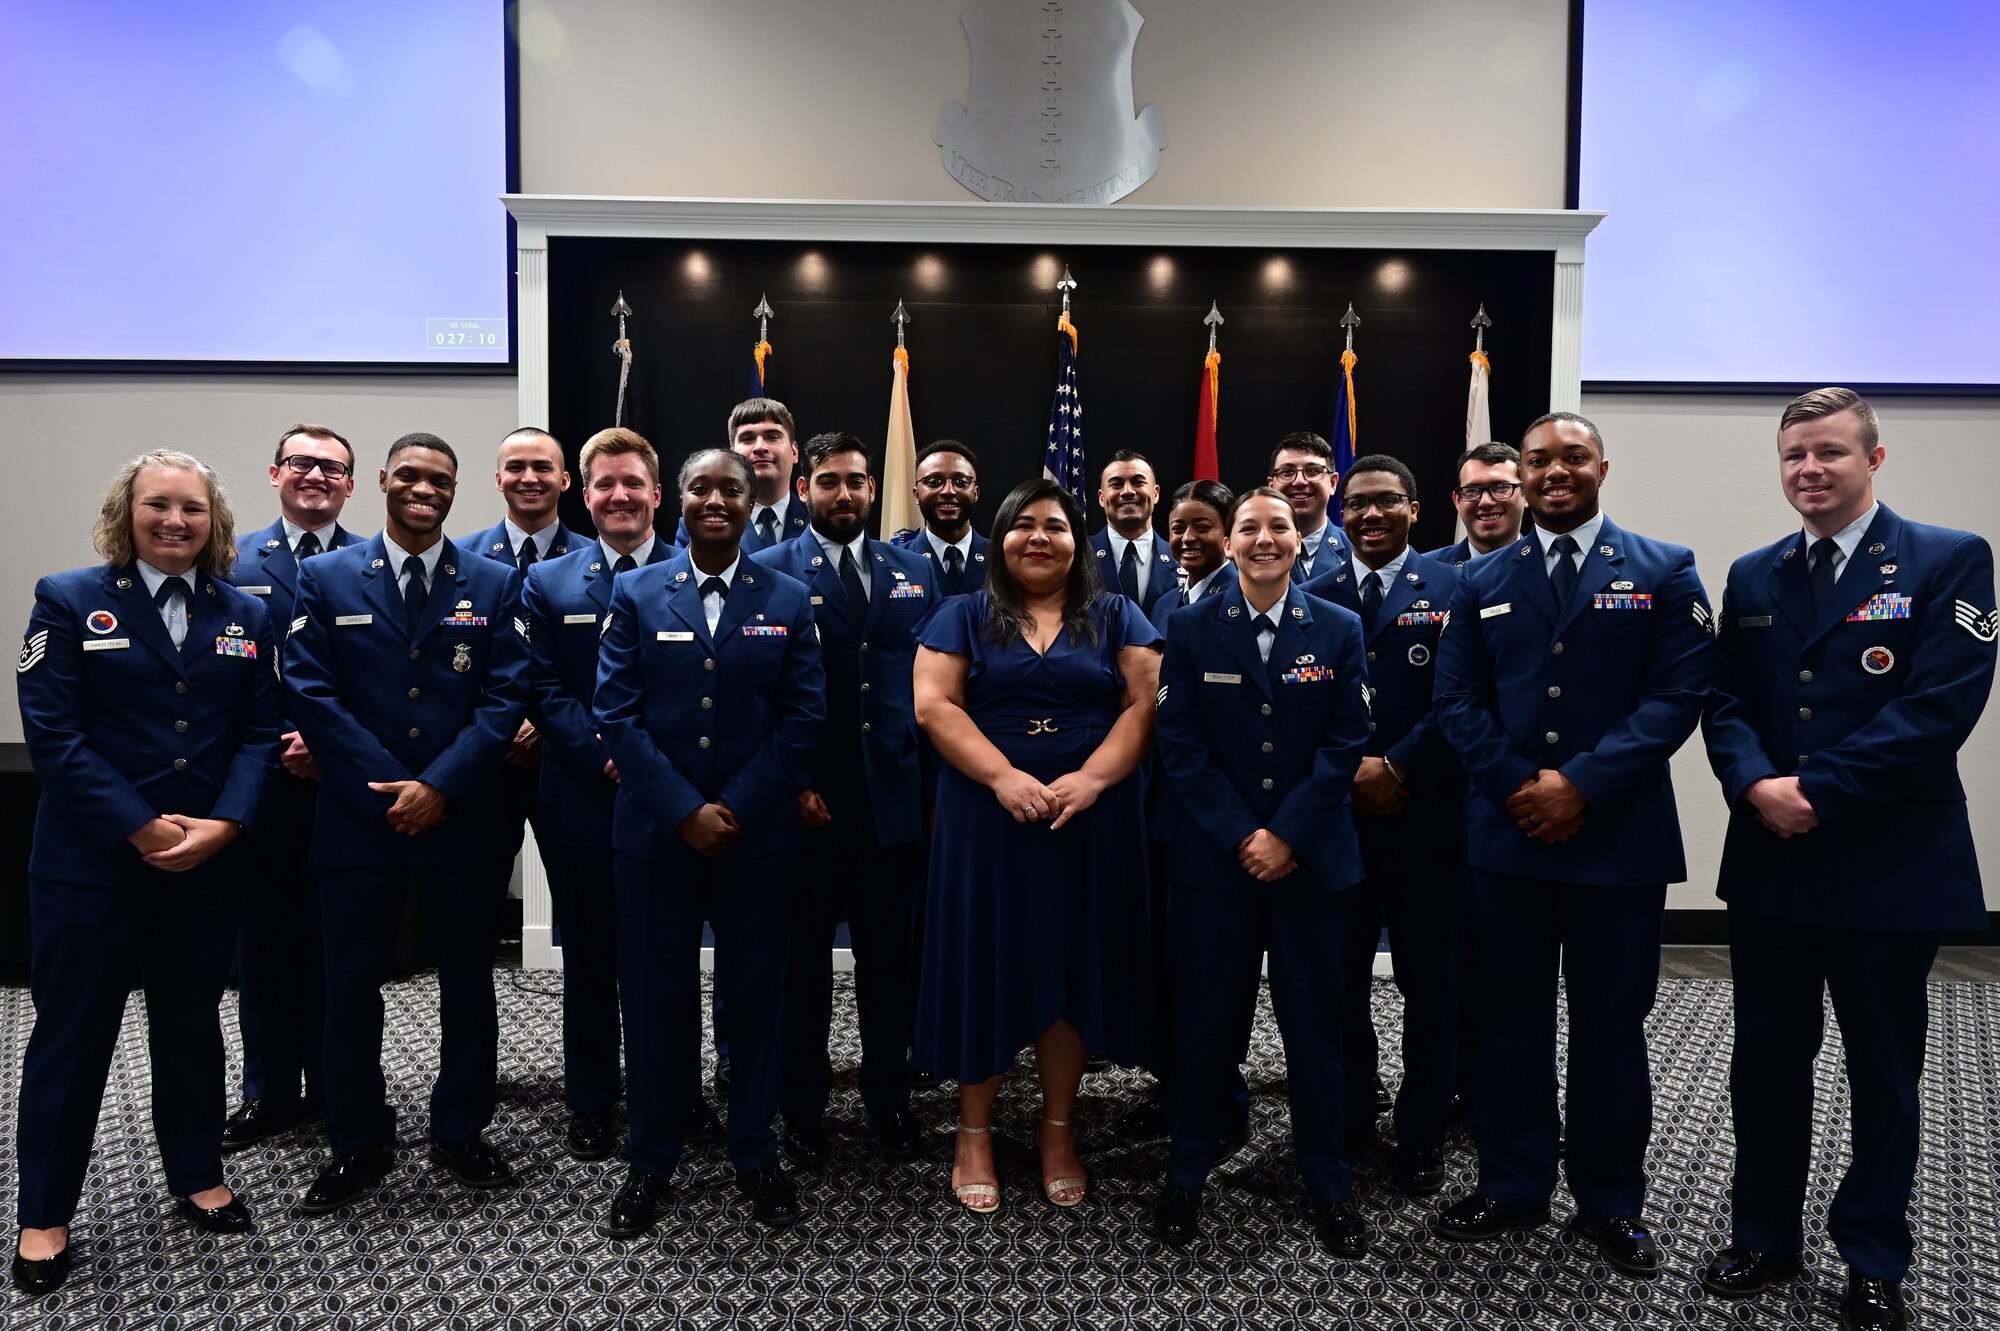 Airman Leadership School graduates and instructors pose for a photo at the Powell Event Center, Goodfellow Air Force Base, Texas, Sept. 7, 2023. ALS is a five-week course designed to prepare senior airmen to assume supervisory duties through instruction in leadership, followership, written and oral communication skills, and the profession of arms. (U.S. Air Force photo by Airman 1st Class Zach Heimbuch)